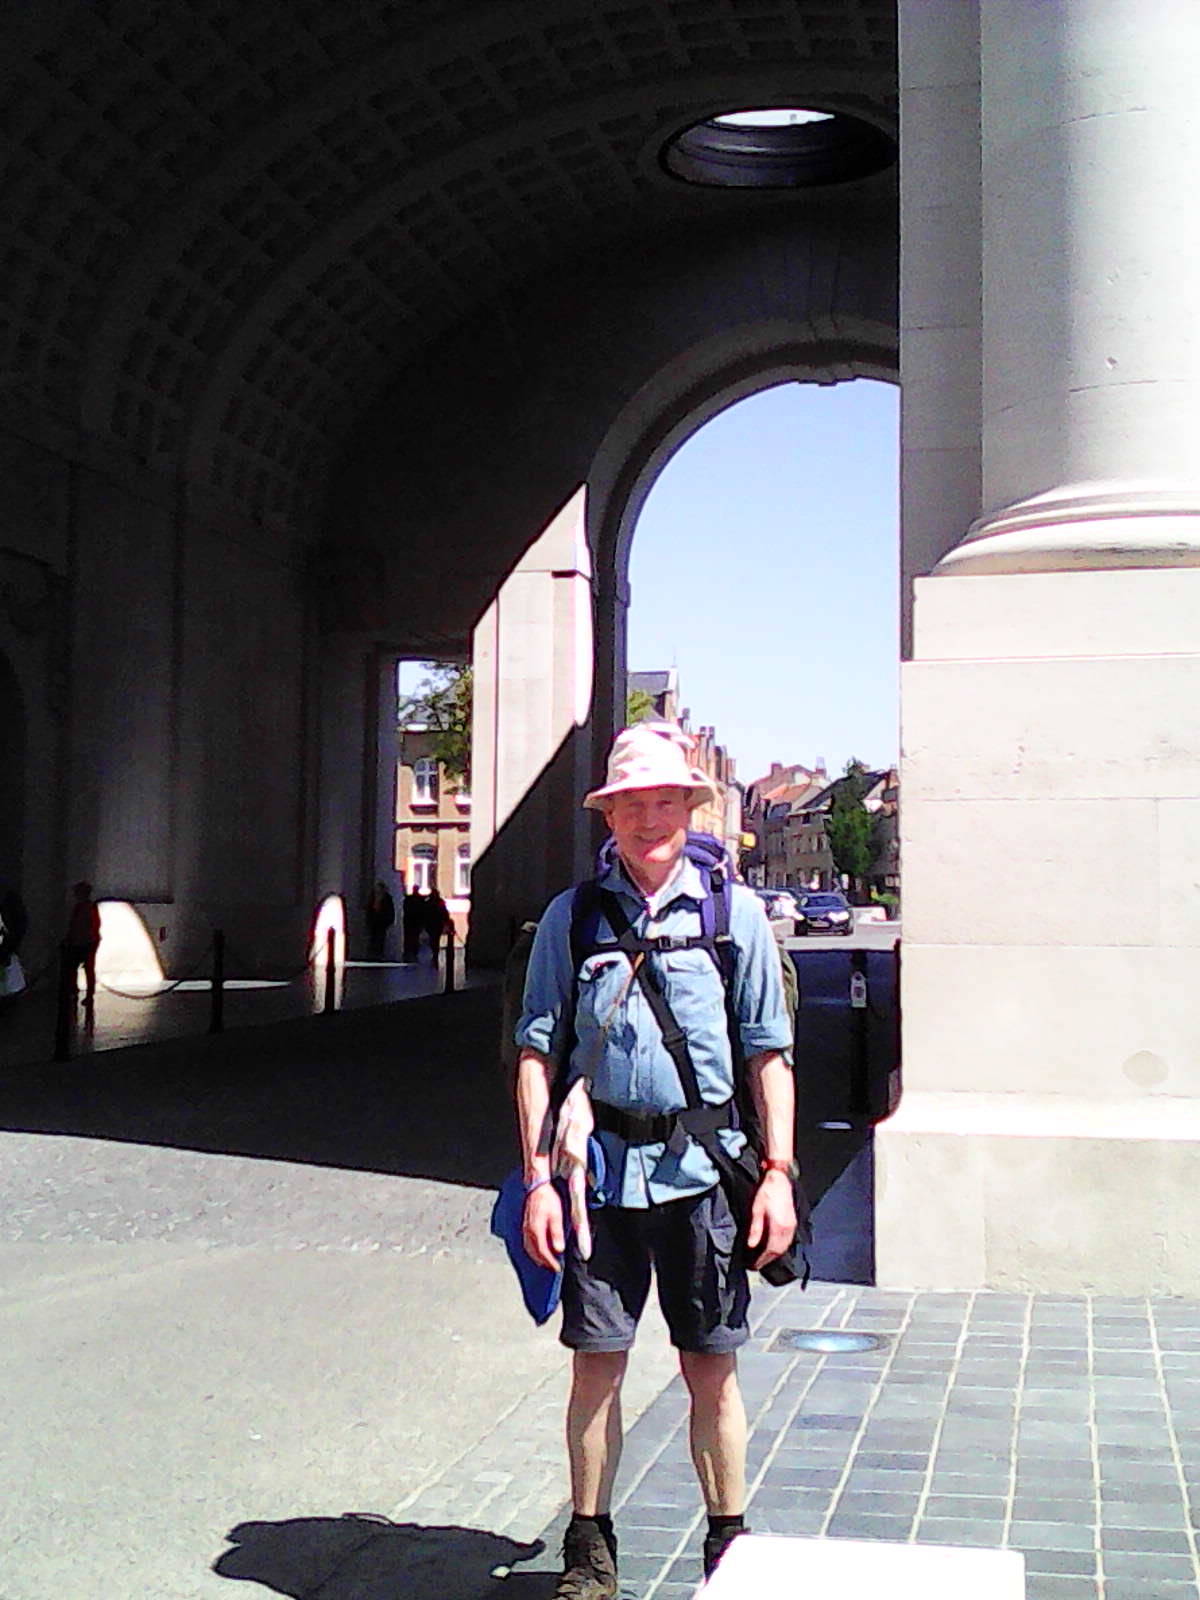 <p>From 8-14 May 2019, I walked the WW1 battlefields of ‘Flanders Fields’ in a
personal pilgrimage of remembrance, sleeping rough under my old Army poncho and
fundraising for #homesforveterans: <a></a><a href="https://www.justgiving.com/fundraising/Ross-Nichols">https://www.justgiving.com/fundraising/Ross-Nichols</a>
</p><p>I did this for 3 reasons:</p><p>1.  I’m the organiser of Salisbury International
Coaching Week. We have been hosted annually since 2017 by a Salisbury-based
charity, Alabare.co.uk, free of charge, so I would like to give something back
to recognise their support. </p><p>

2.  Both my grandfathers and a number of
great uncles fought in the trenches during WW1, some of whom were killed and
wounded.  I would like to pay my respects for their service and sacrifice.<br/>

</p><p>3.  On 11 November 2018 on the 100th anniversary of
Armistice Day, I paraded with my Royal Engineer intake as a veteran for the
first time.  We were commissioned into the Corps of Royal Engineers 35
years previously and decided to base our reunion around Remembrance Day events
in a village in middle England.  I found myself unexpectedly moved by
being part of this significant moment in our nation’s history.  This
experience has inspired me to do more.  Supporting our homeless veterans
feels like an appropriate way to honour the memory of the fallen:
#homesforveterans</p><p>The
experience of my pilgrimage was everything I hoped it would be and more.  I walked 90 km, met some amazing people and
visited key WW1 sites such as: Passchendaele, Tyne Cot, Hooge, Hill 62, Hill 60
and Mesen.  Walking into Ypres towards
the end, the bells of St Peters rang out and I truly felt like a pilgrim.  The ‘Last Post’ ceremony at the Menin Gate
was unforgettable.  I’d like to generate
more donations through speaking about my pilgrimage so if you know
organisations or companies that might be interested, I would be grateful for an
introduction.  For more pictures and a fuller account of my pilgrimage, go to: <a href="https://www.justgiving.com/fundraising/Ross-Nichols">https://www.justgiving.com/fundraising/Ross-Nichols</a> </p>